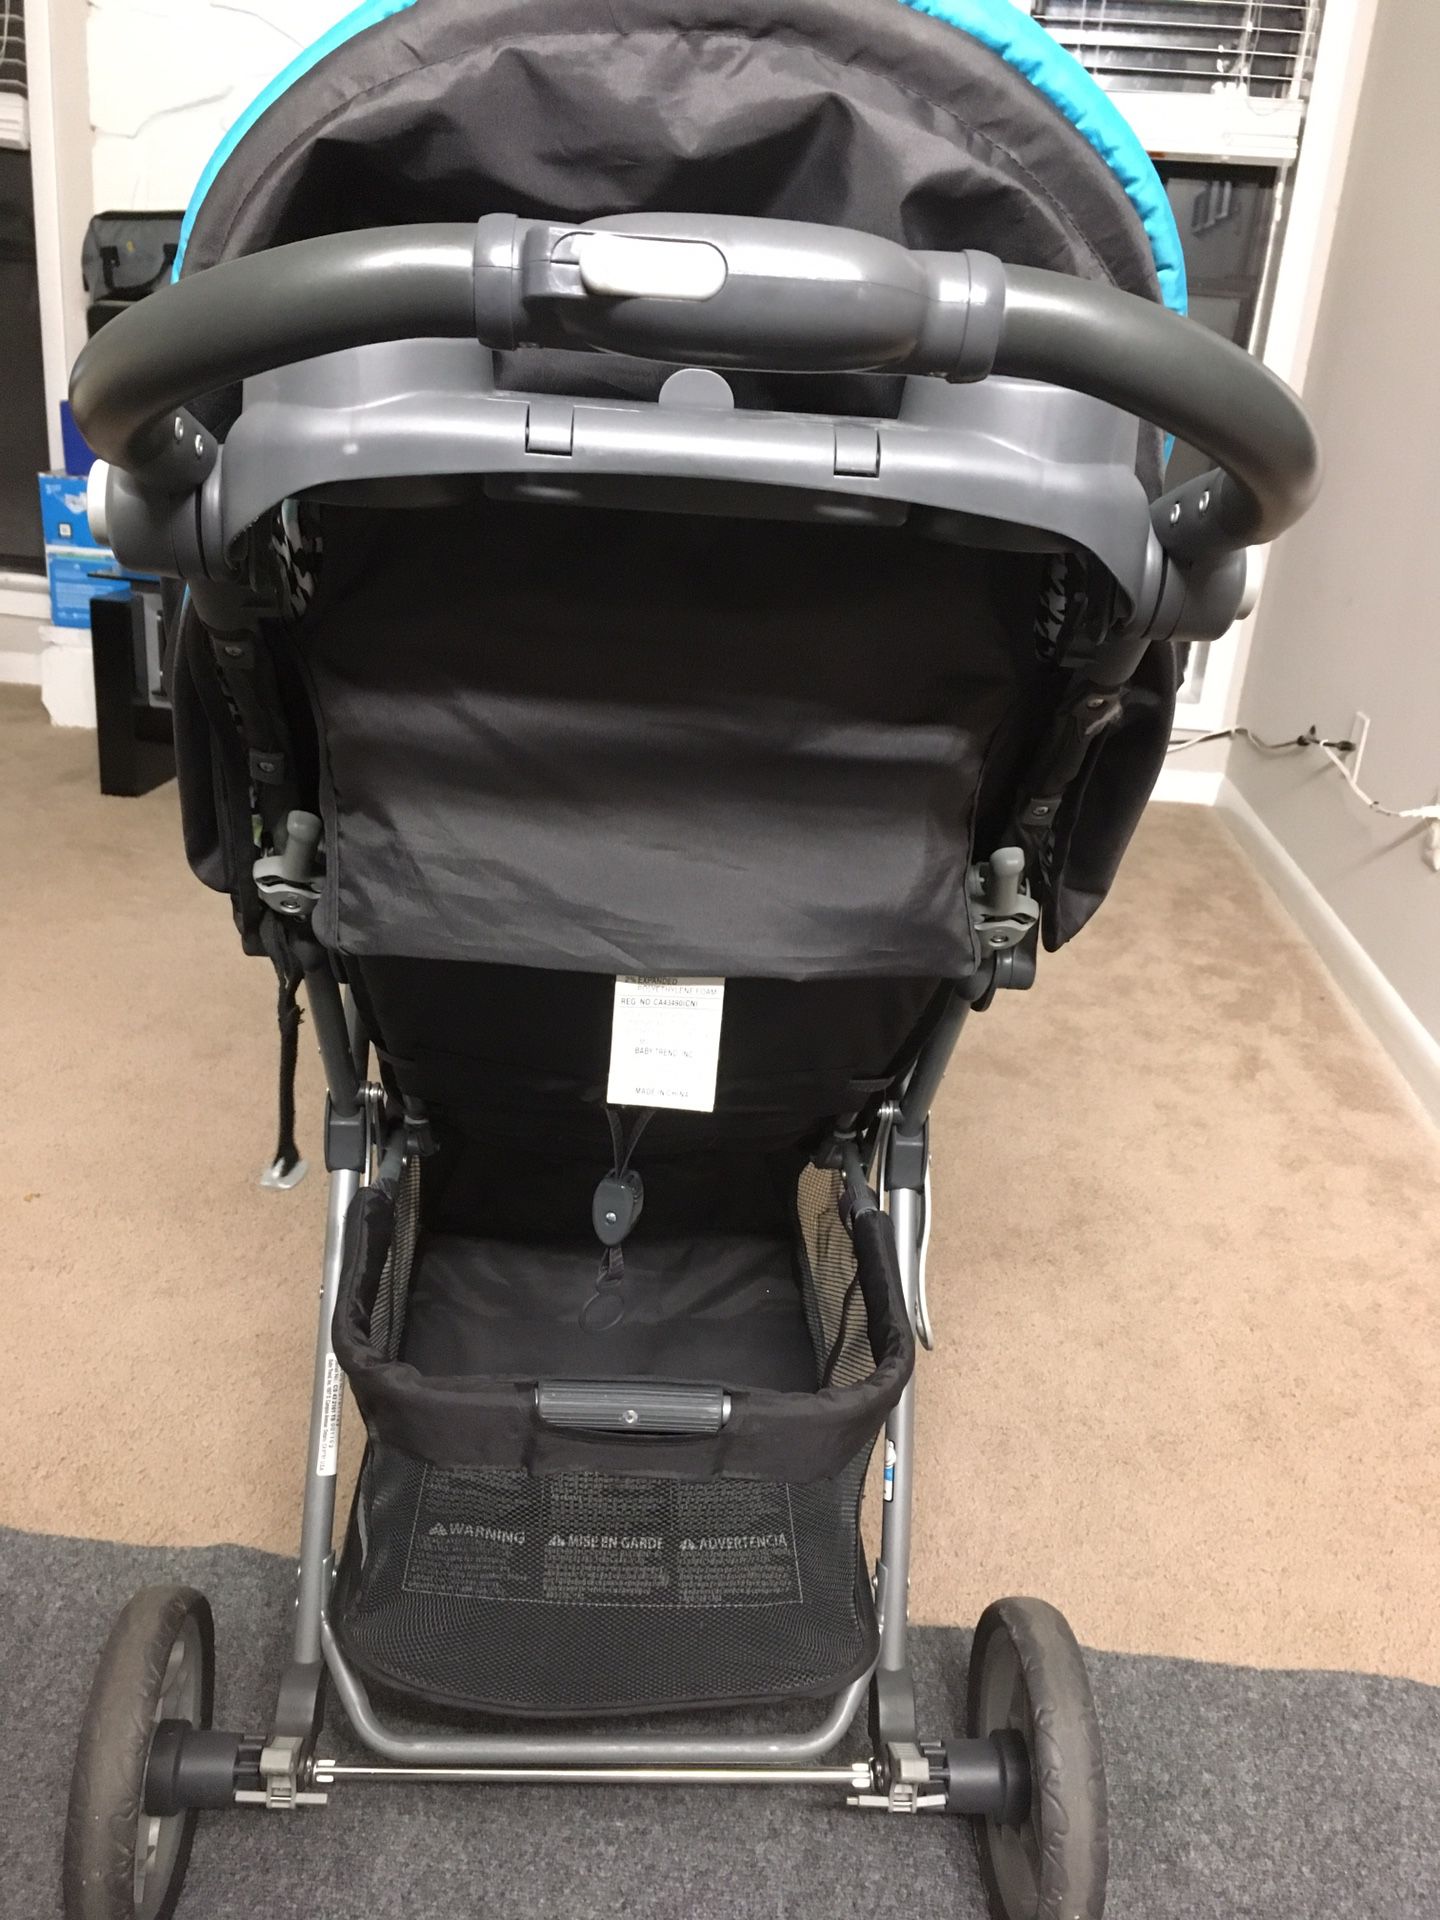 Baby trend stroller in good condition for $10